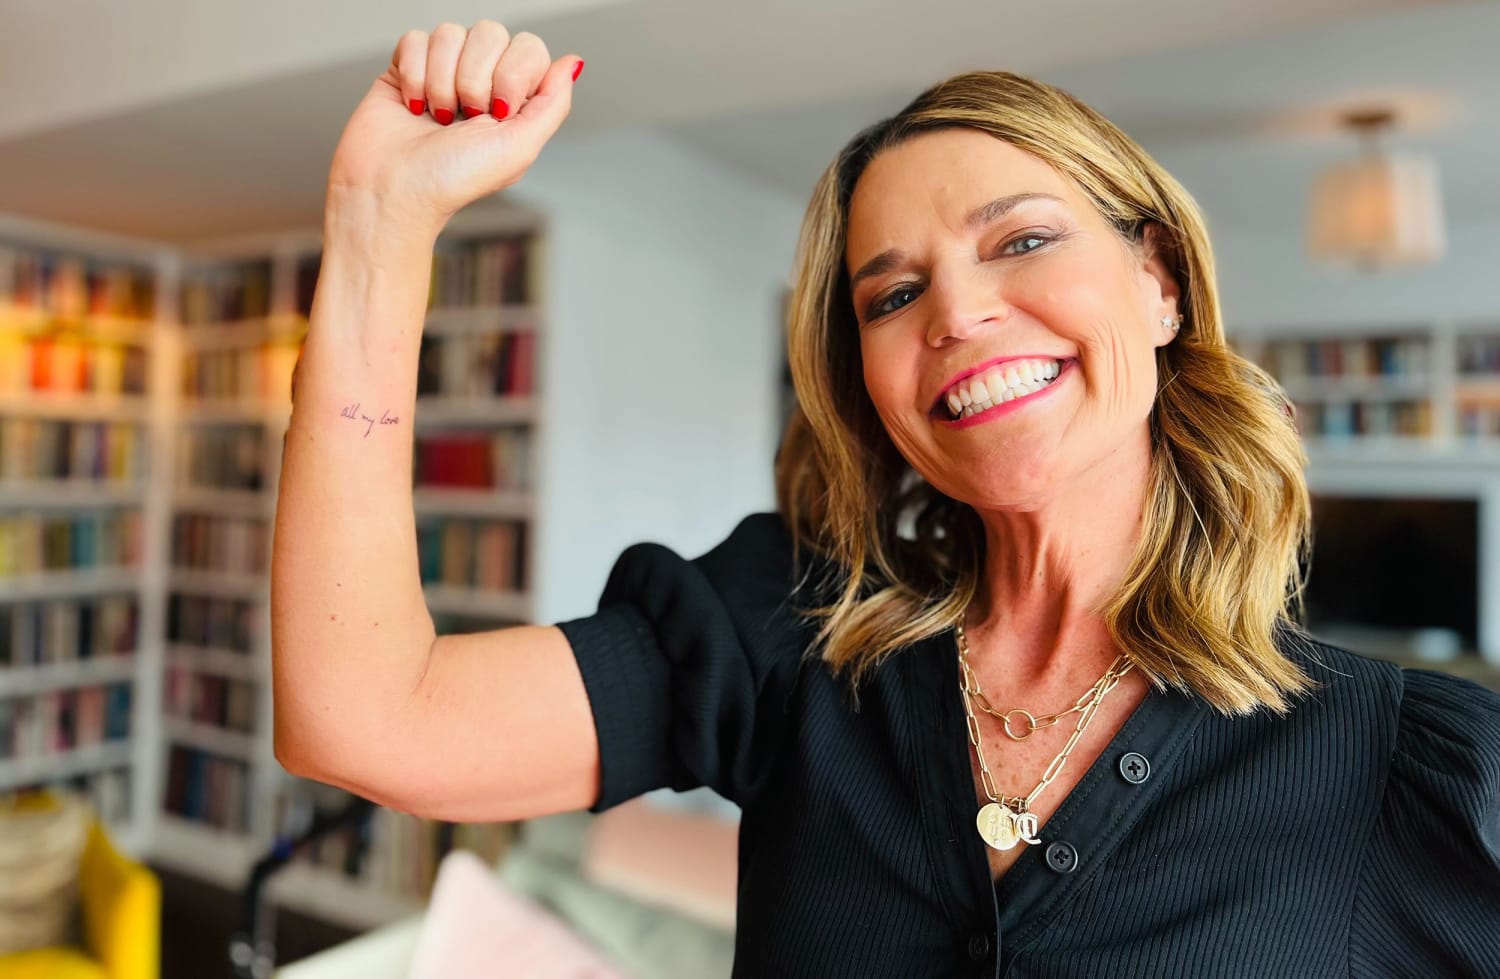 Savannah Guthrie Gets First Tattoo With BFF Drew Barrymore